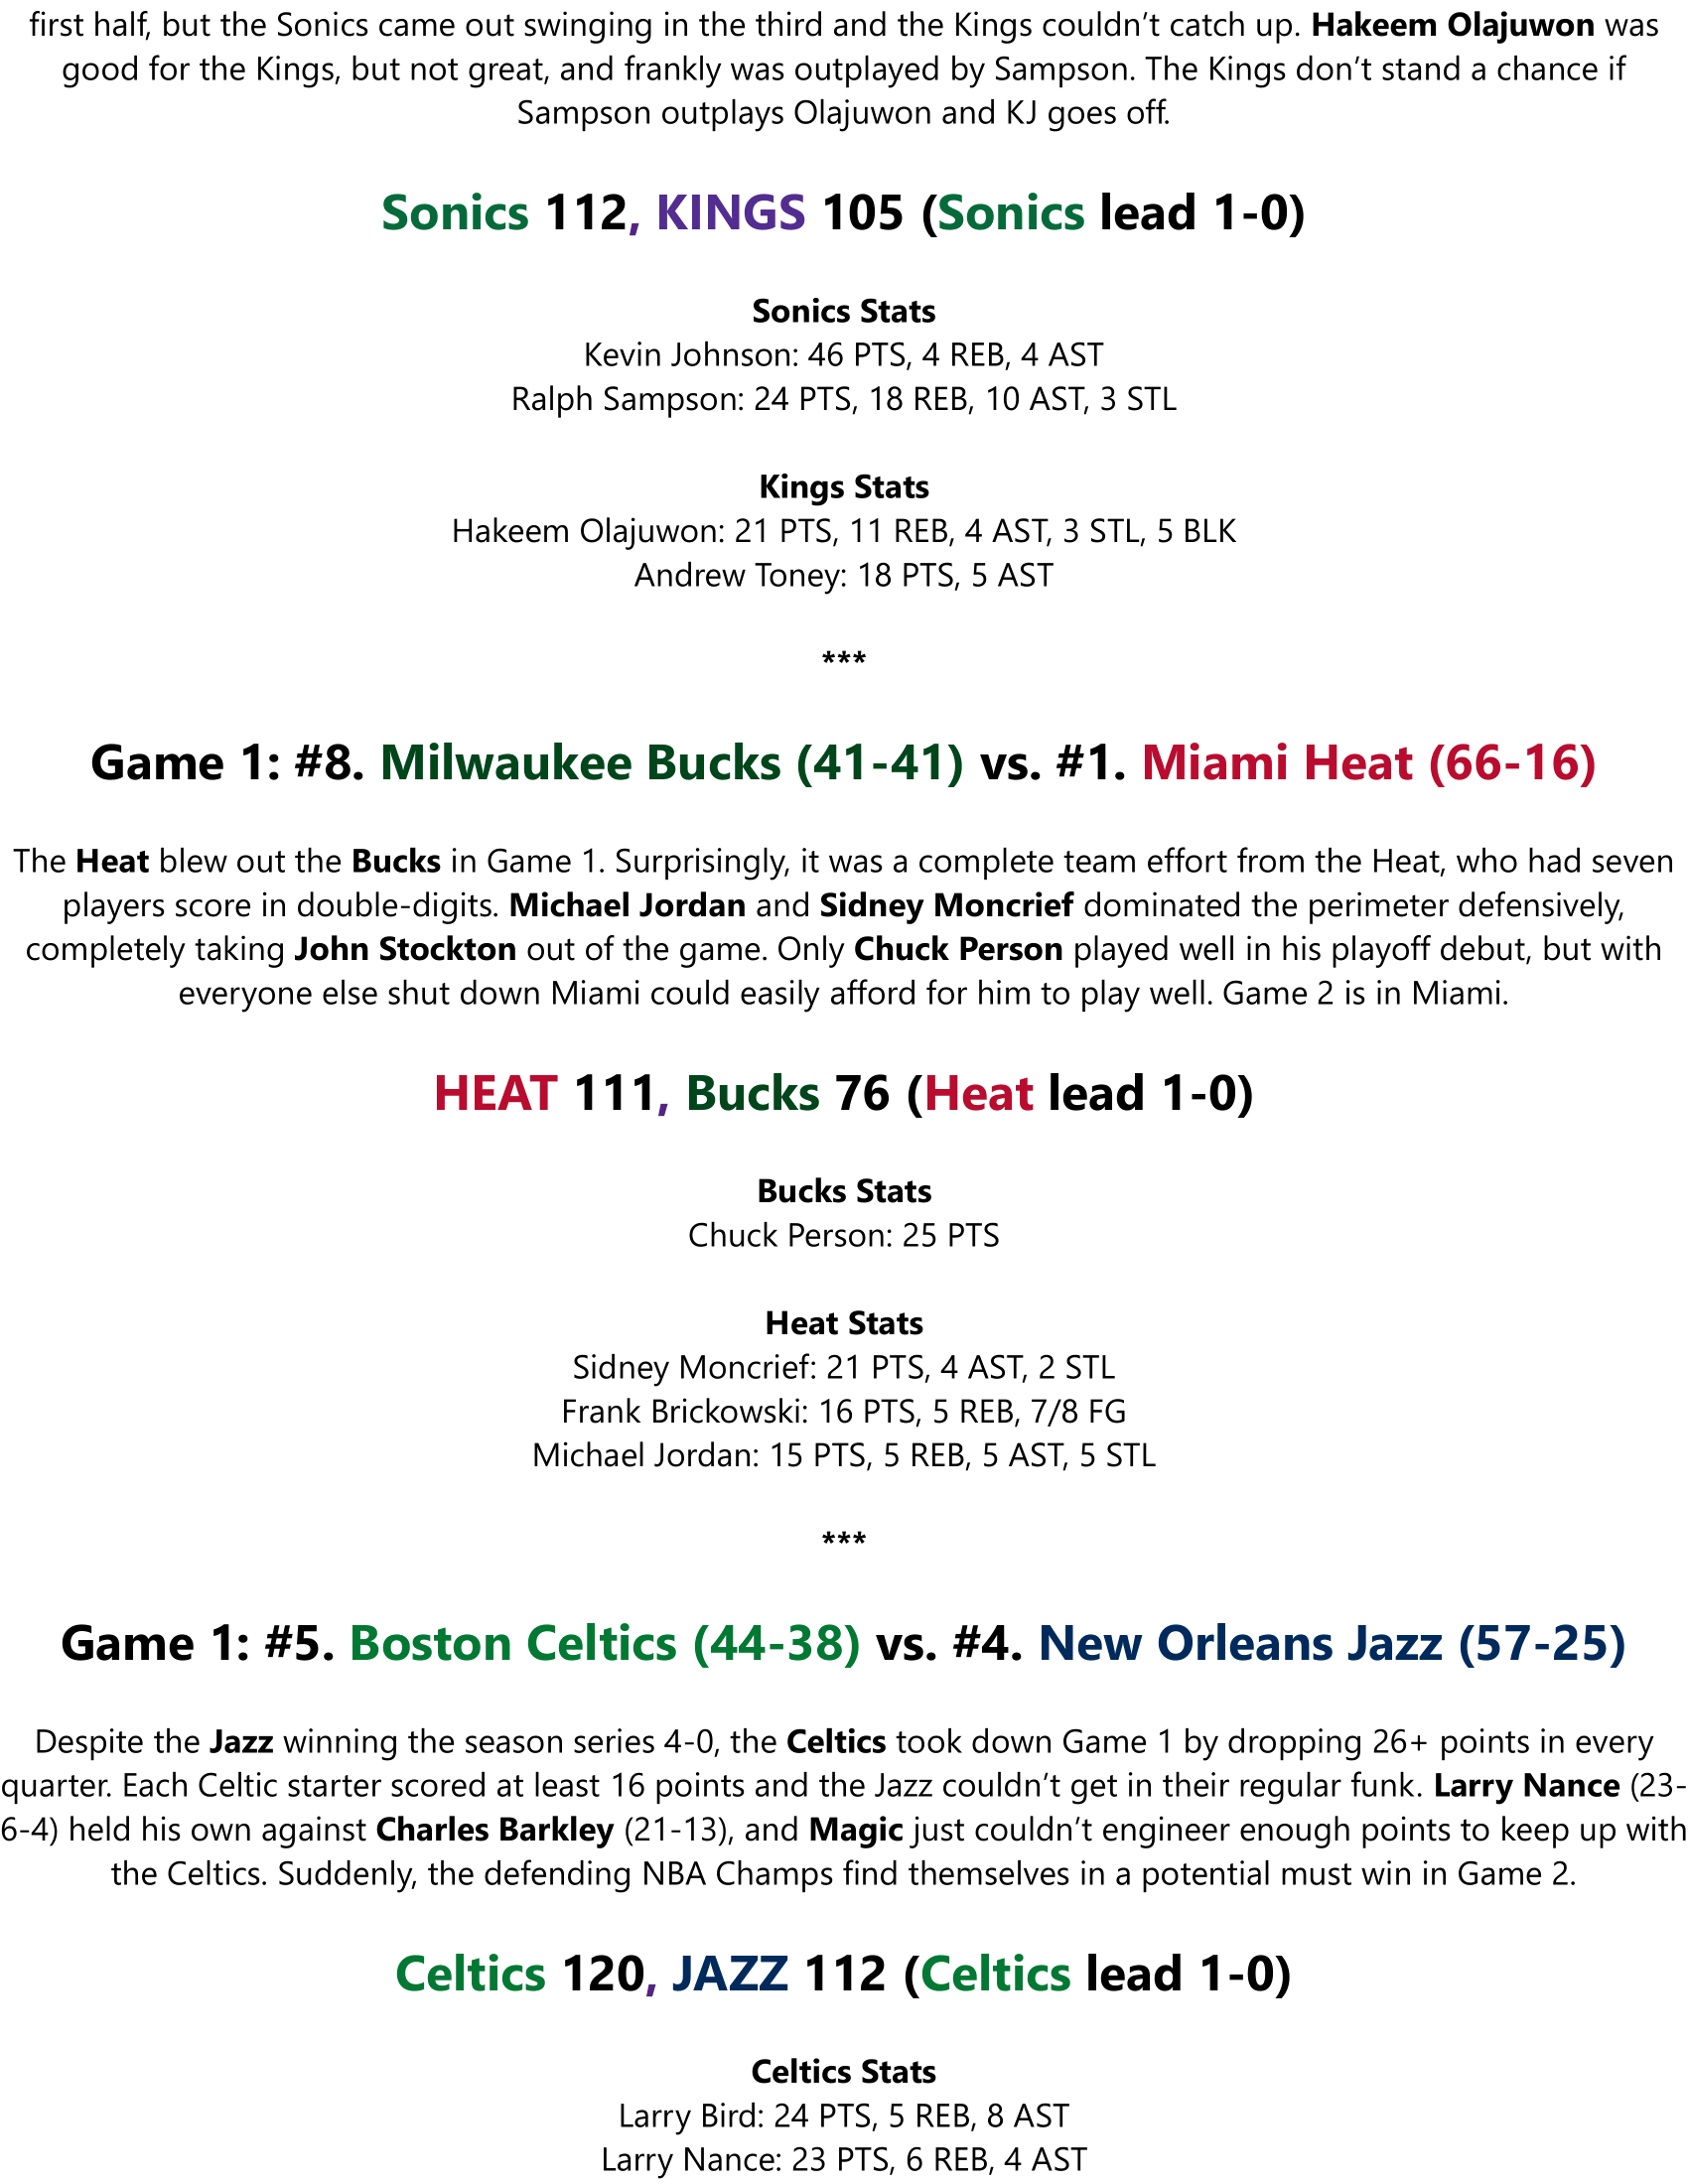 89-90-Part-5-Round-1-Semi-Preview-03.png